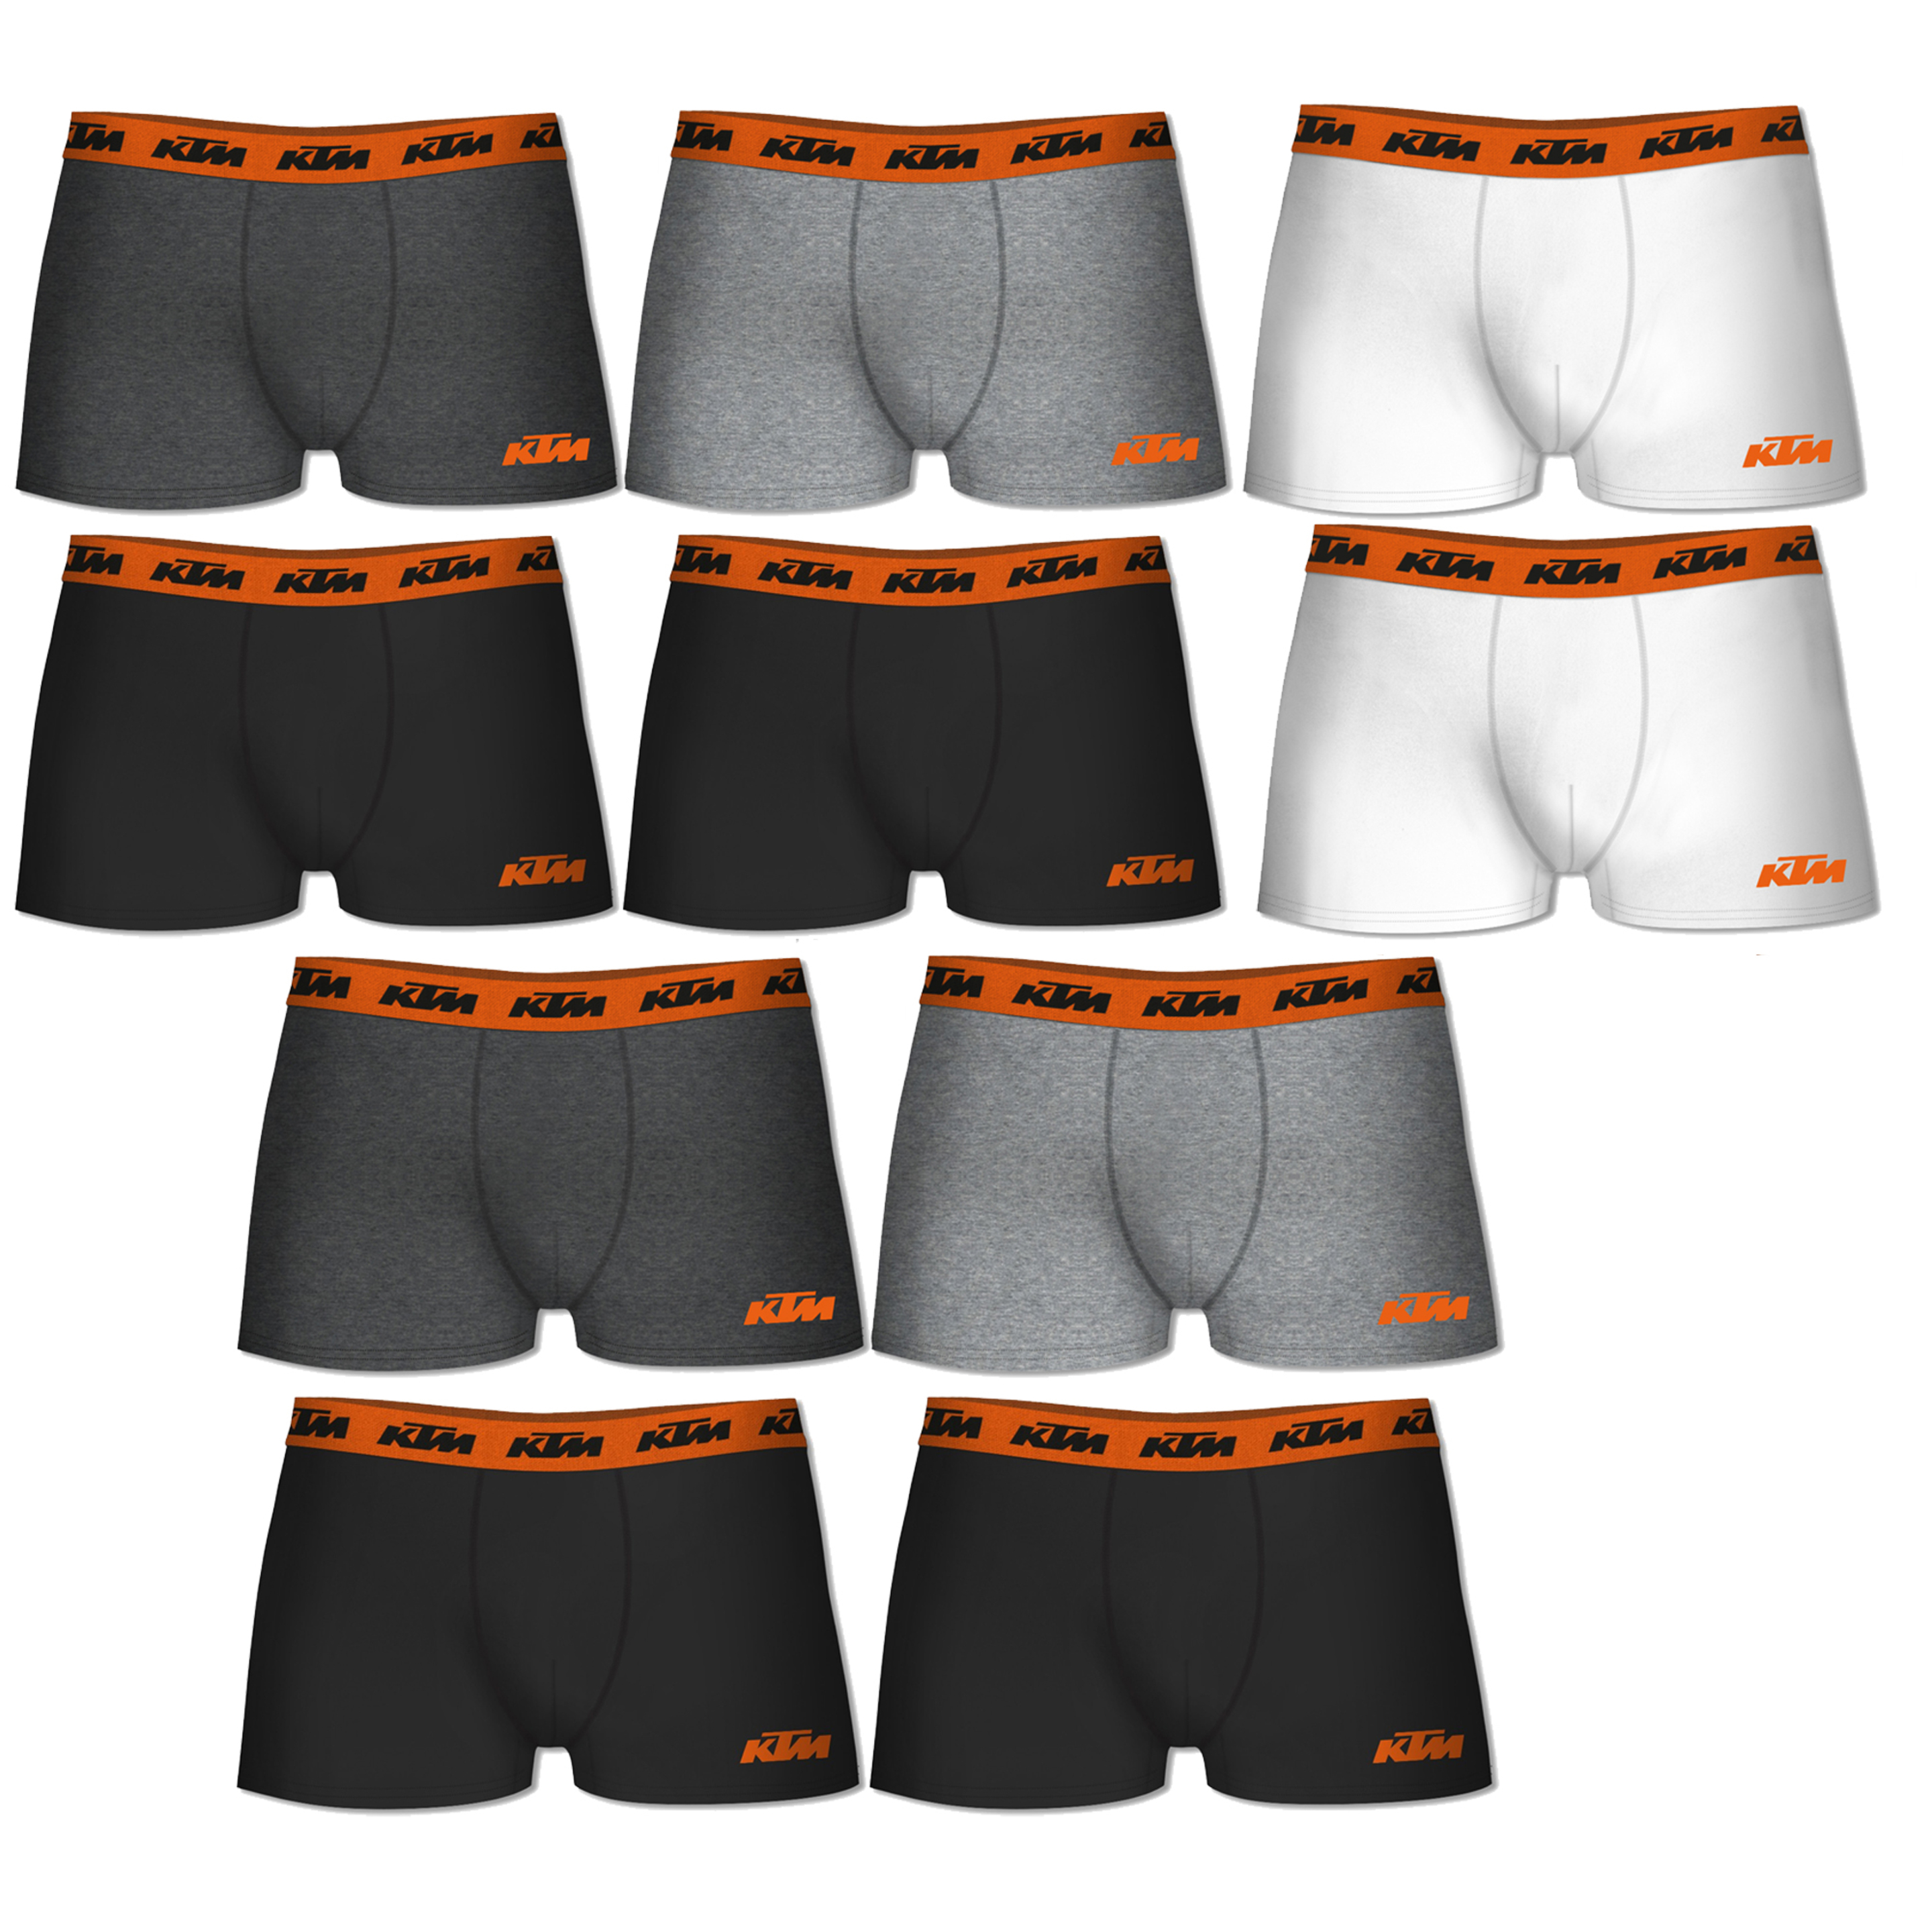 Pack 10 Calzoncillos Ktm - multicolor - 